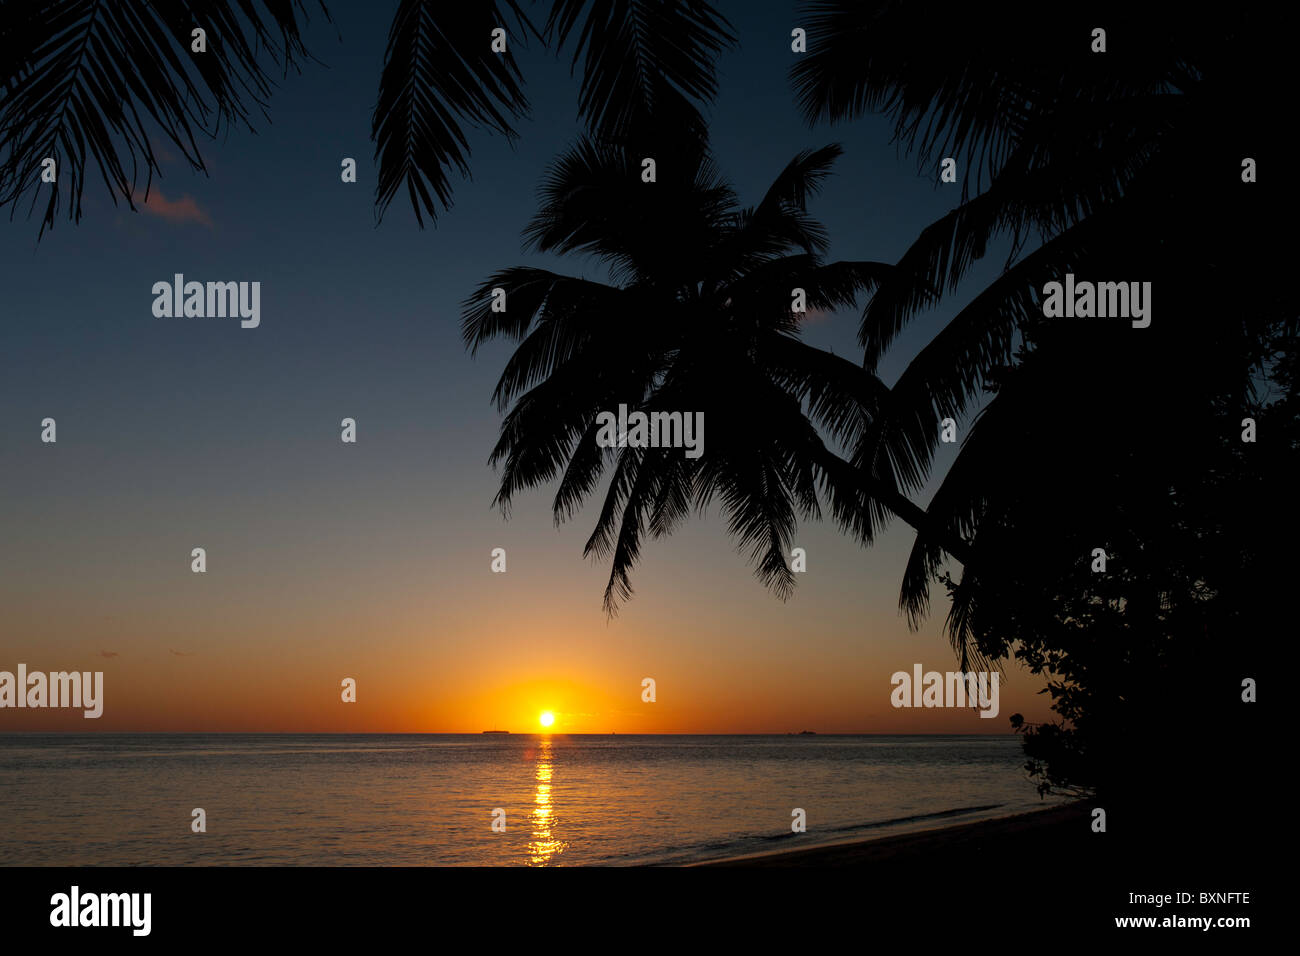 Sunset from beach of tropical island with silhouetted palm tree. Maldives, Indian Ocean. Stock Photo